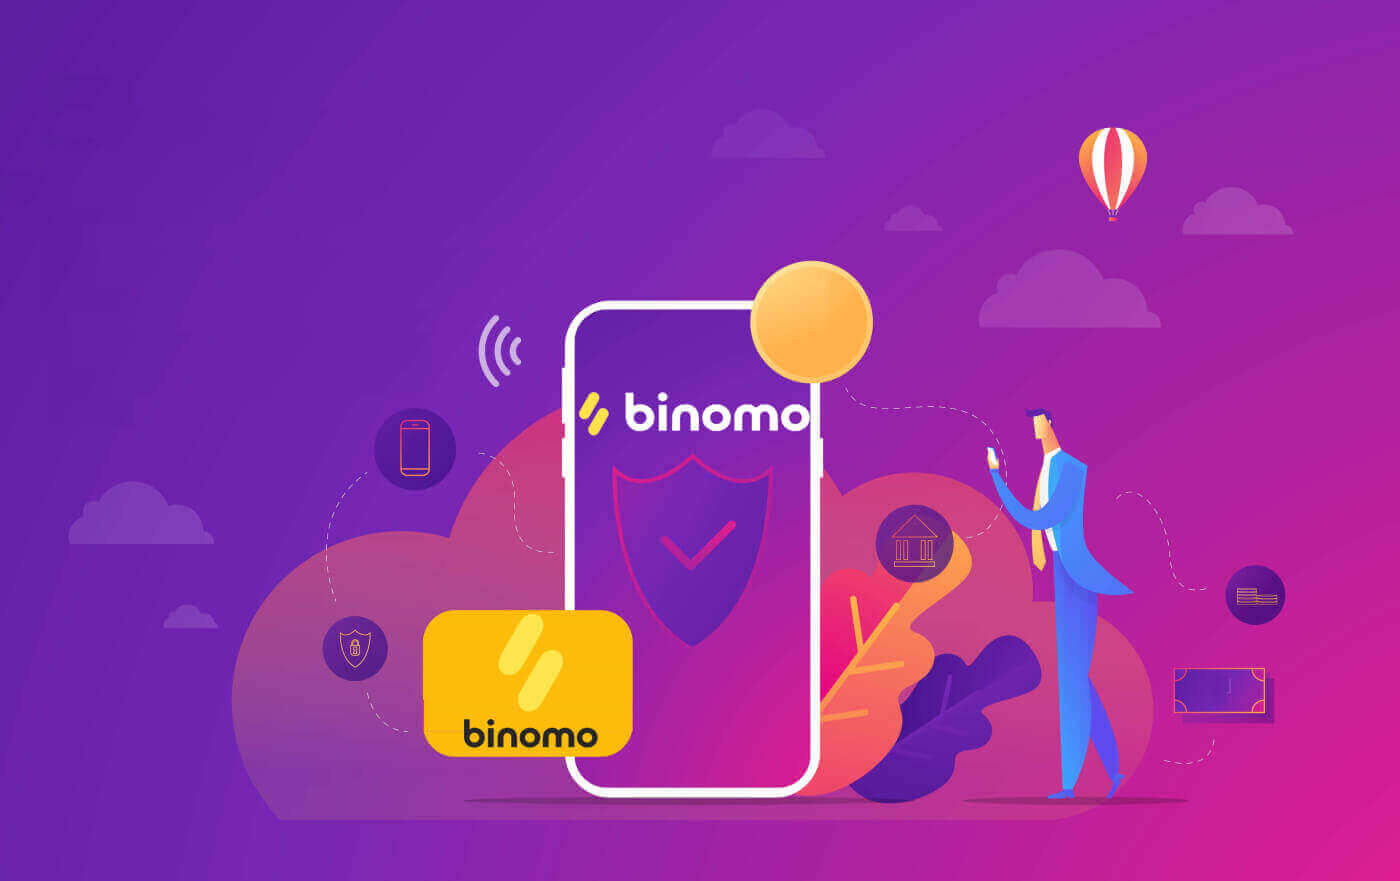 How to Login and Deposit Funds into Binomo